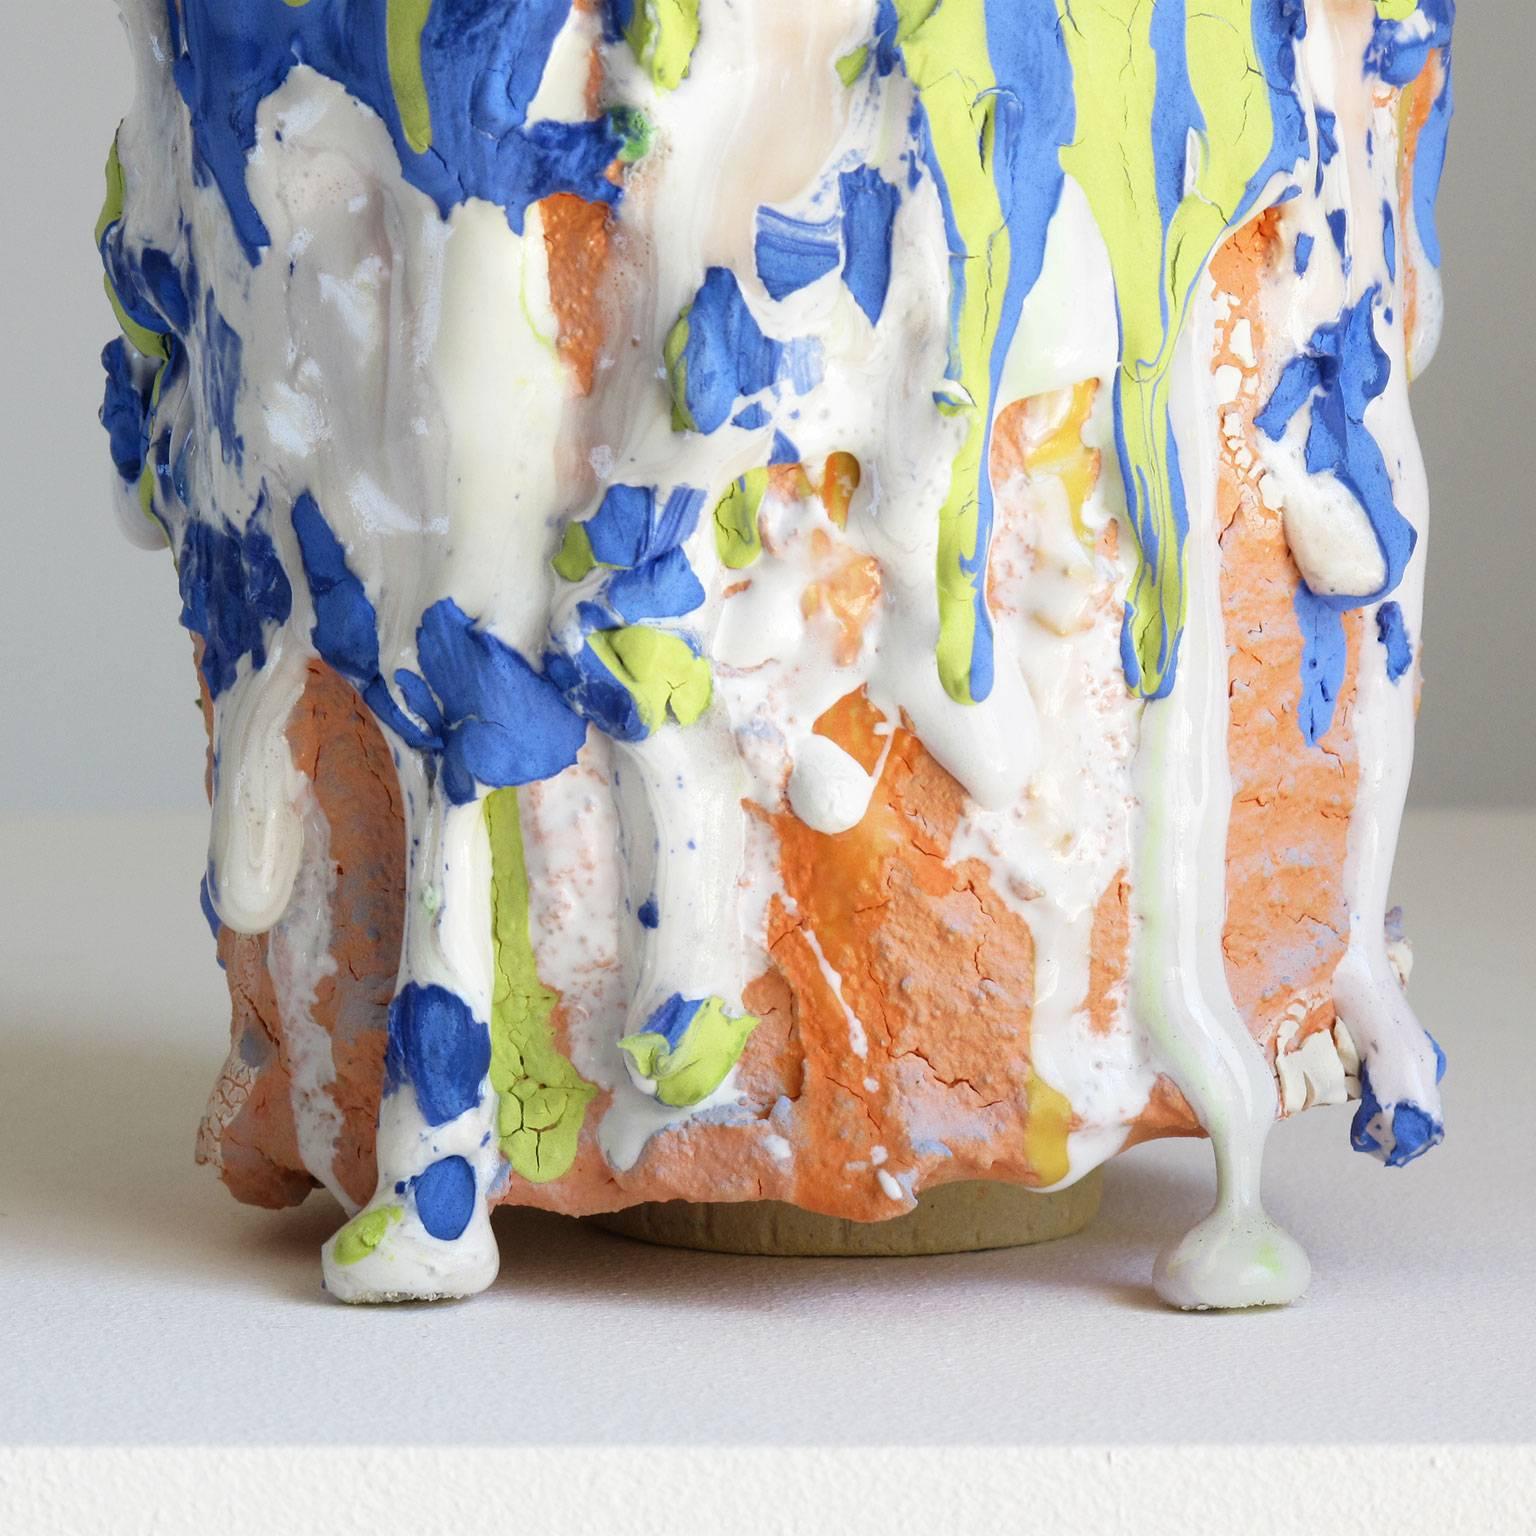 Contemporary Ceramic 'Cup' by Los Angeles Artist Brian Rochefort, 2015 For Sale